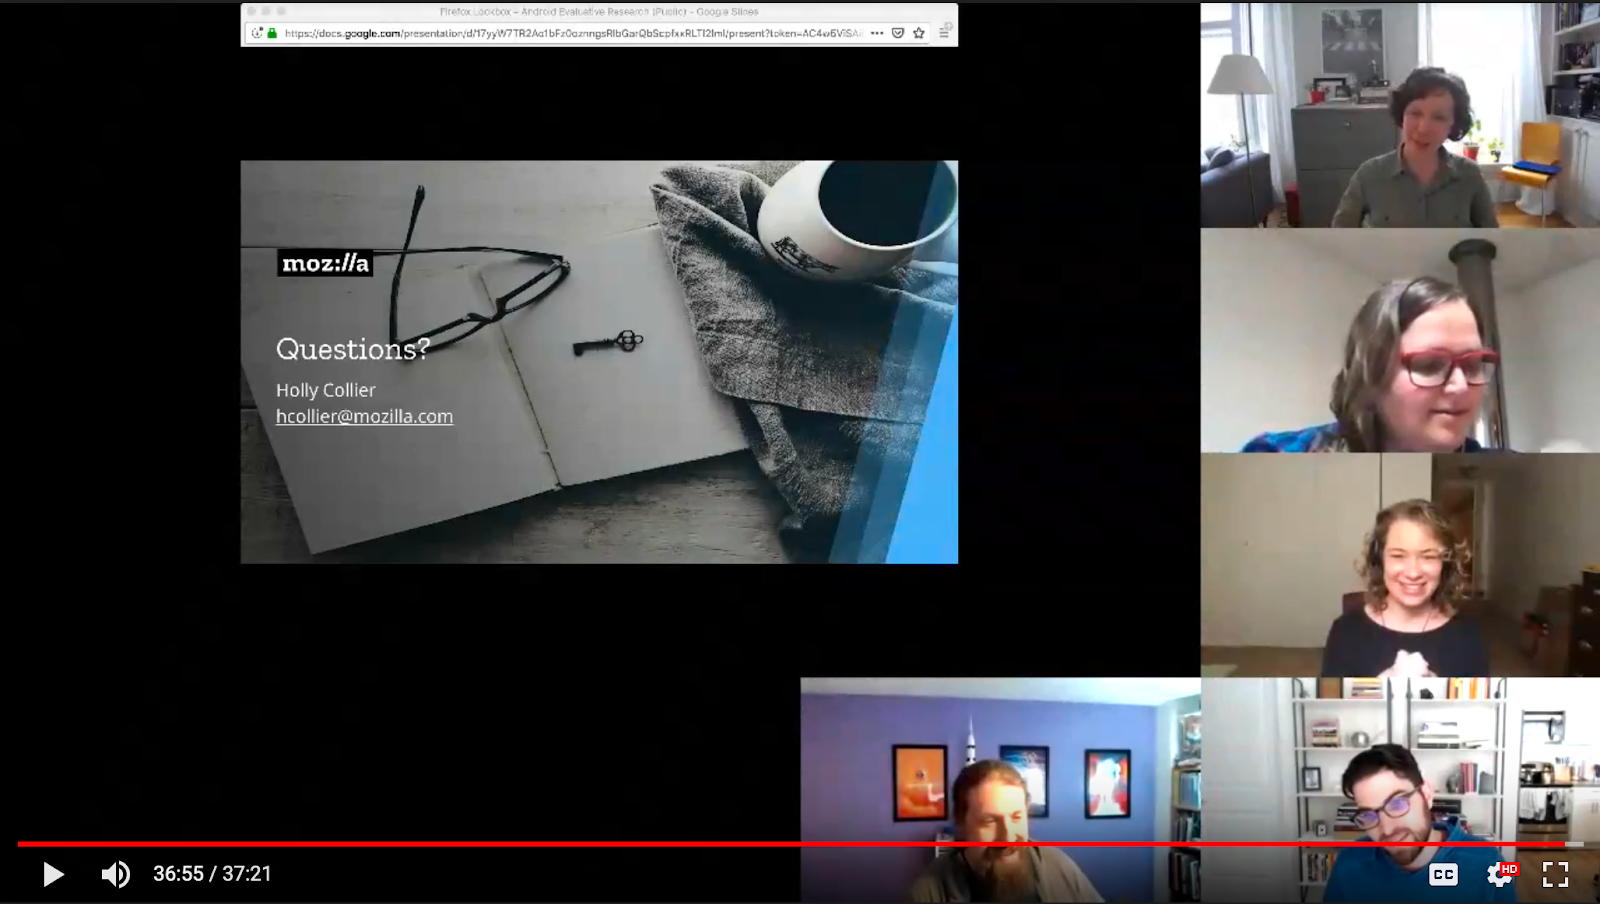 The videochat interface, showing the Lockwise for Android findings presentation and attendees’ faces.